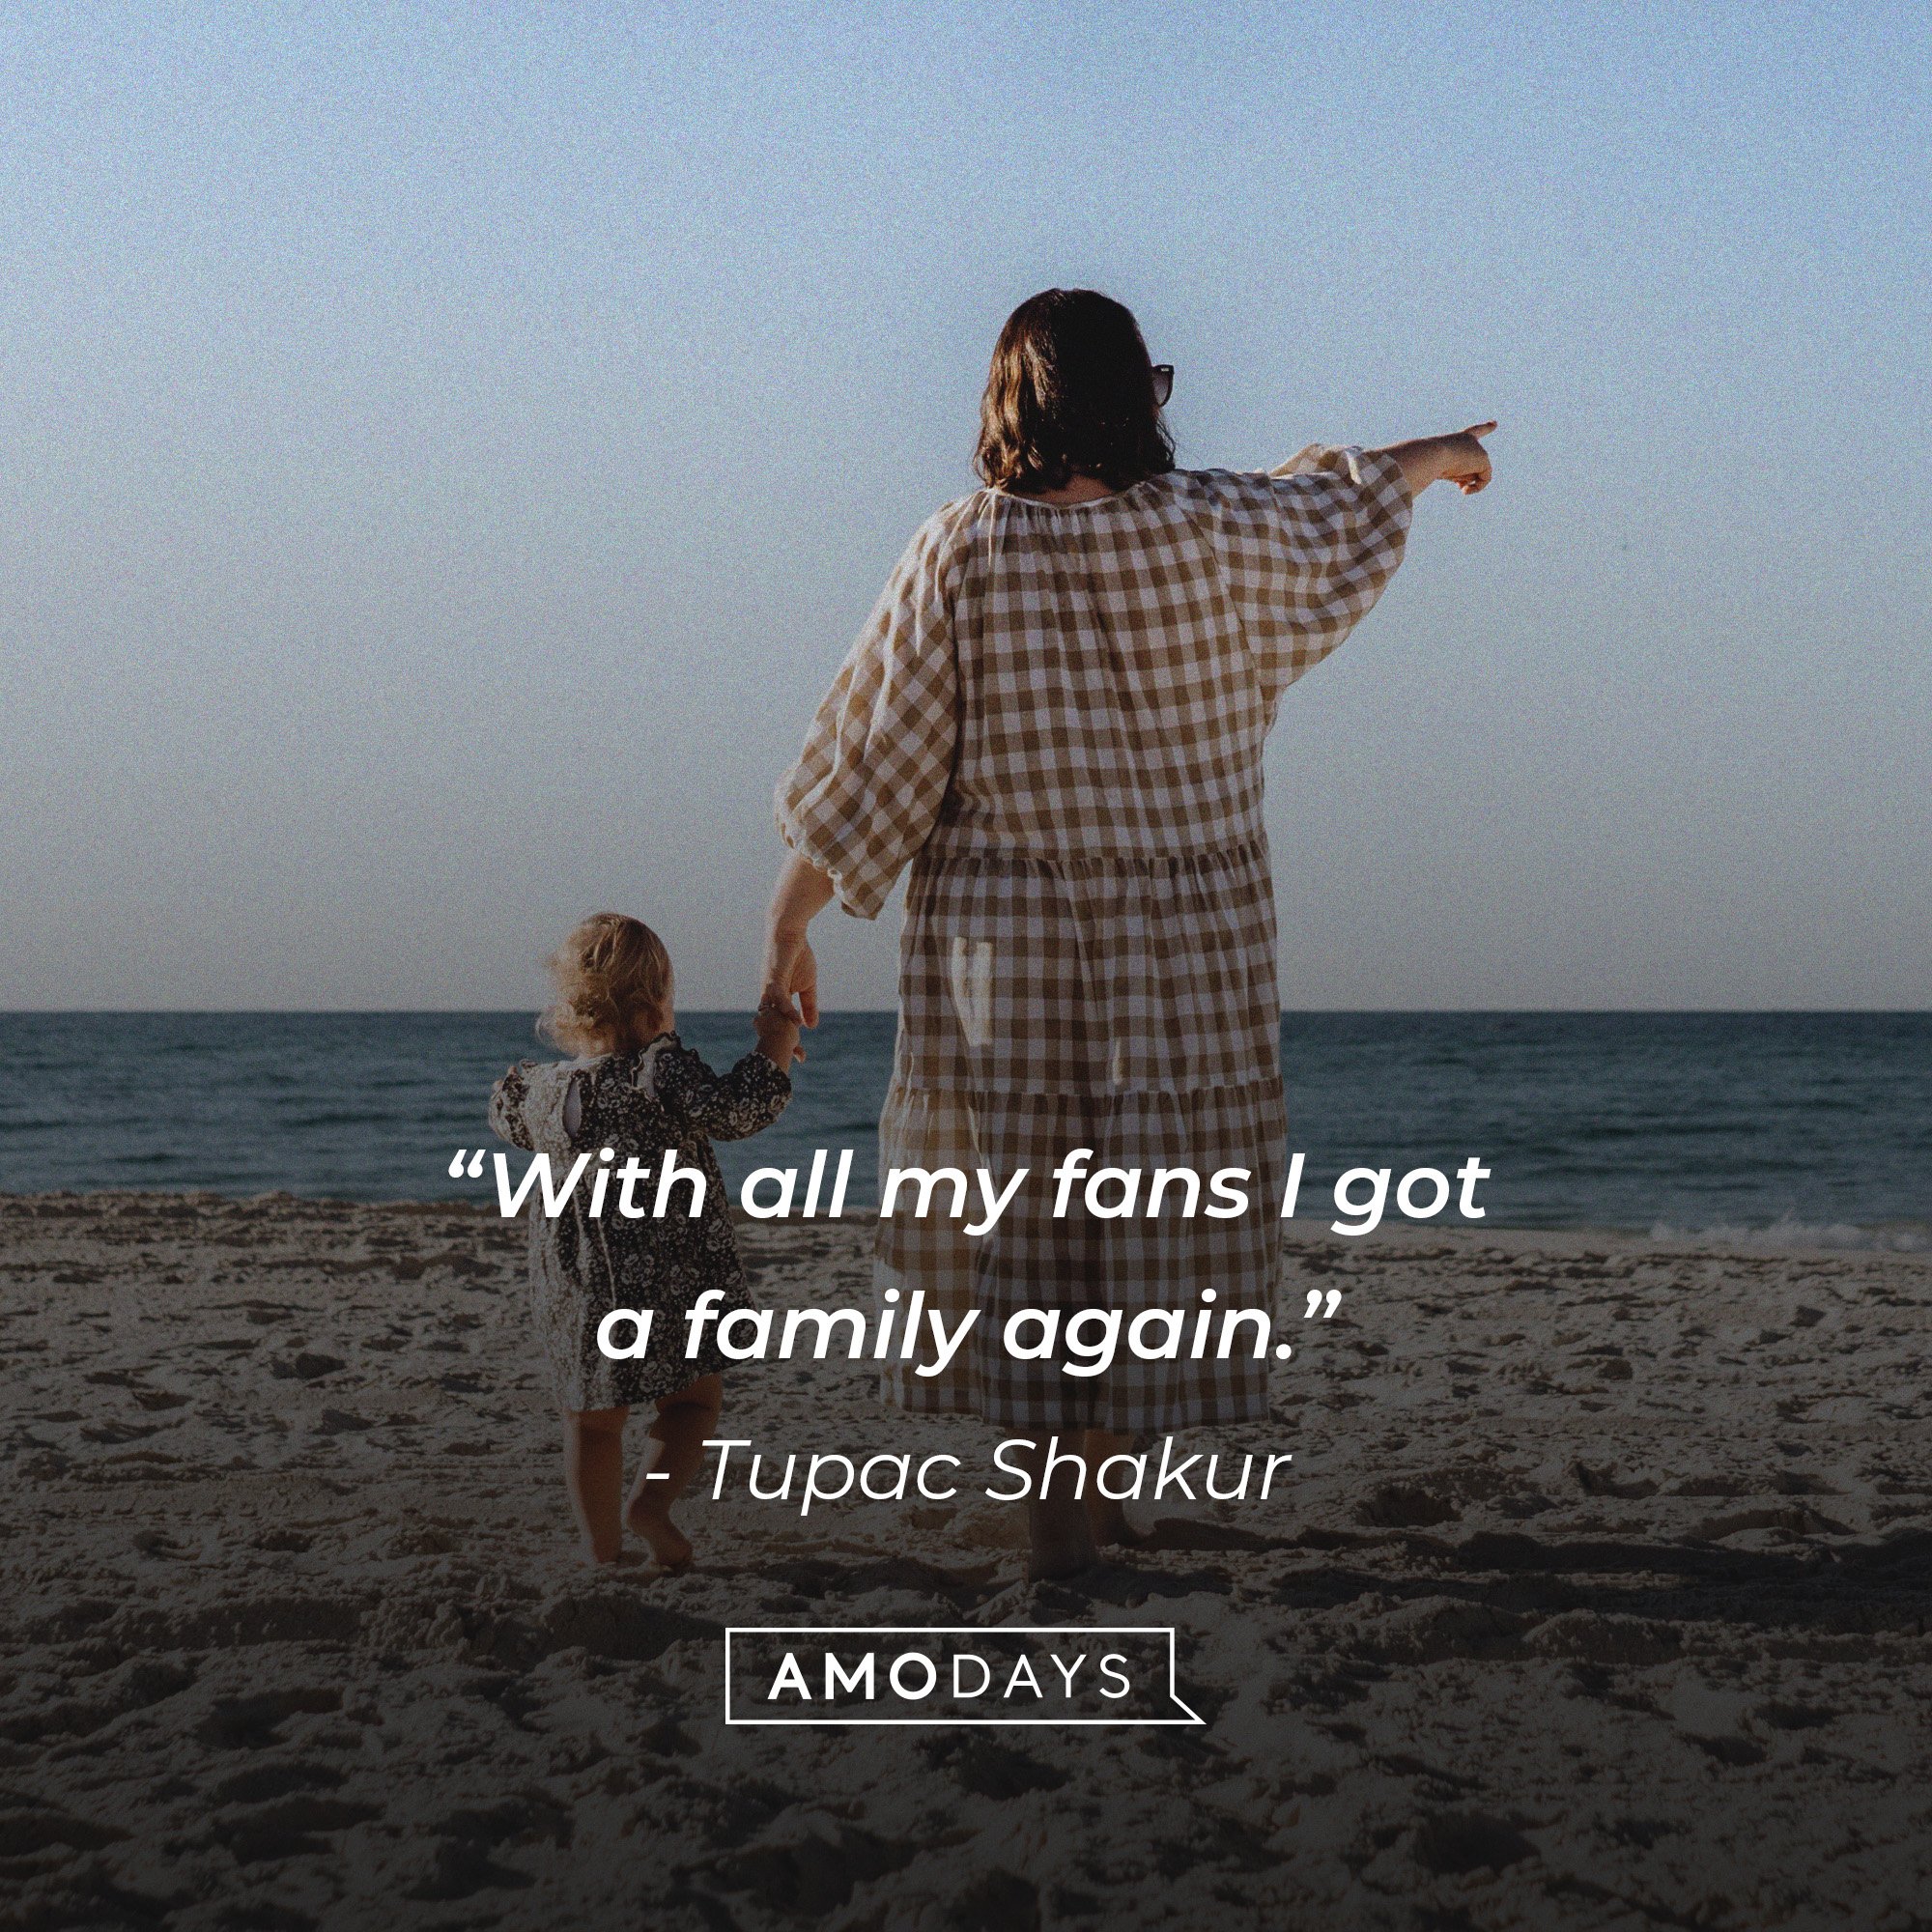  Tupac Shakur's quote: “With all my fans I got a family again.” | Image: AmoDays